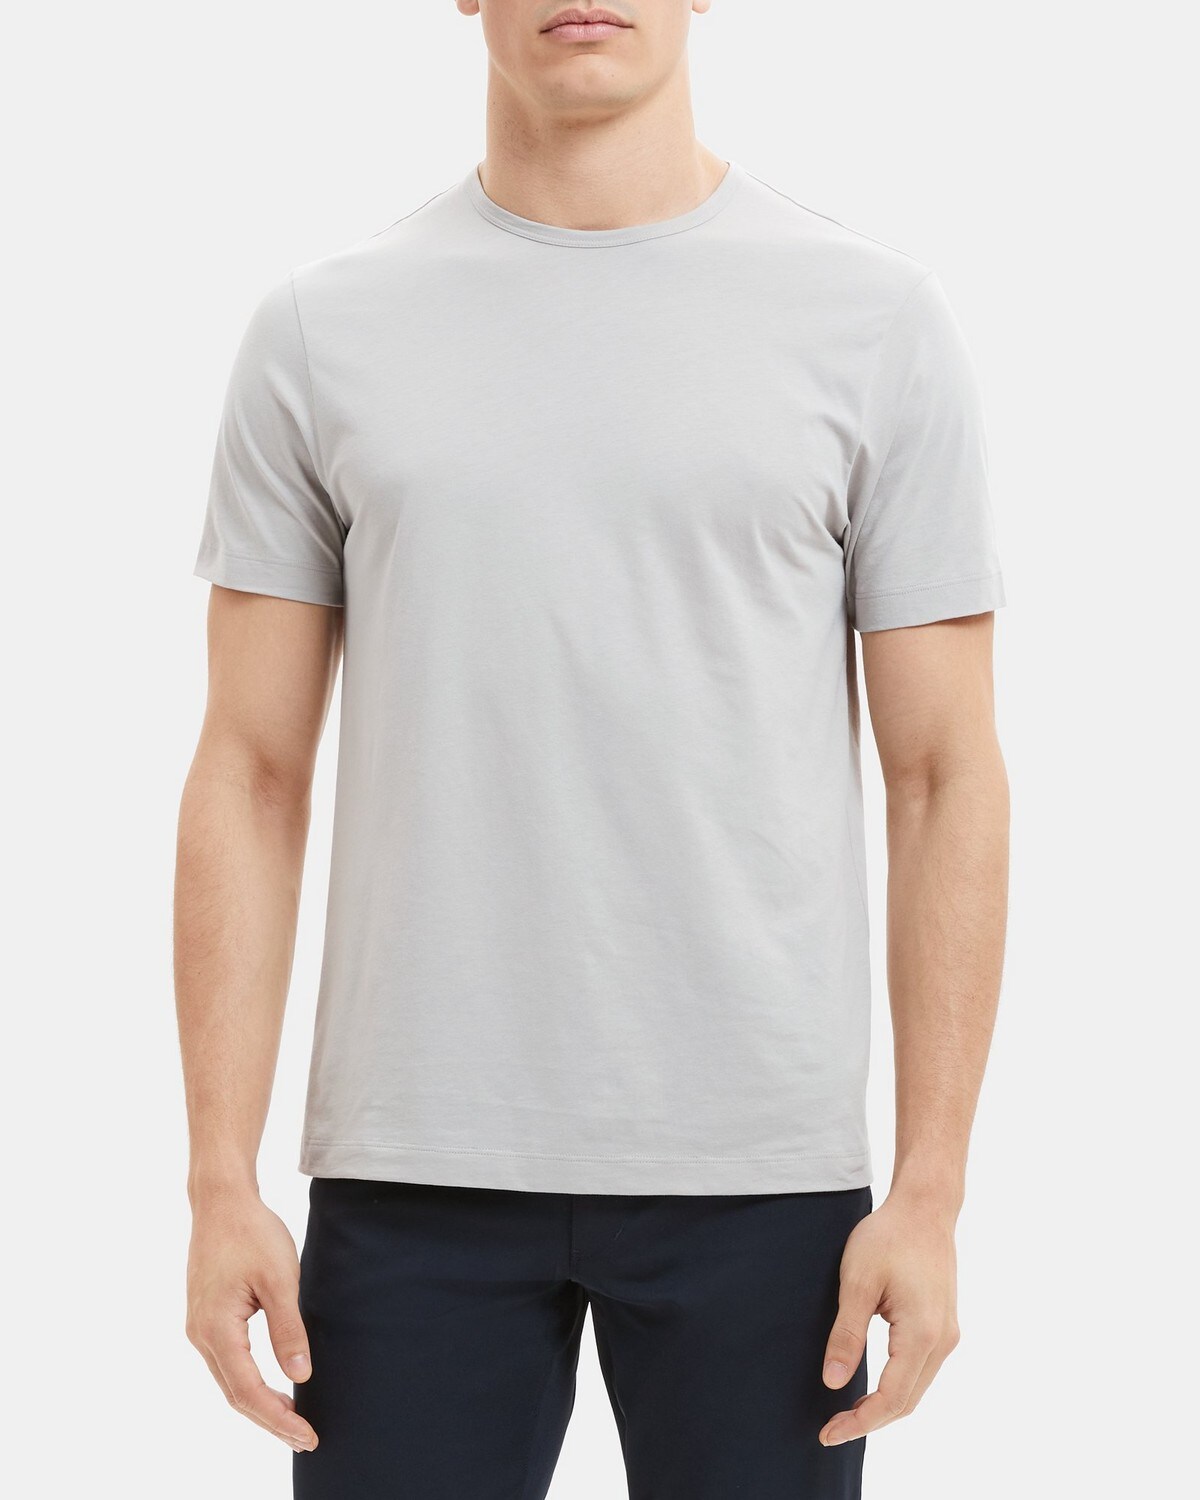 Relaxed Tee in Organic Luxe Cotton Jersey